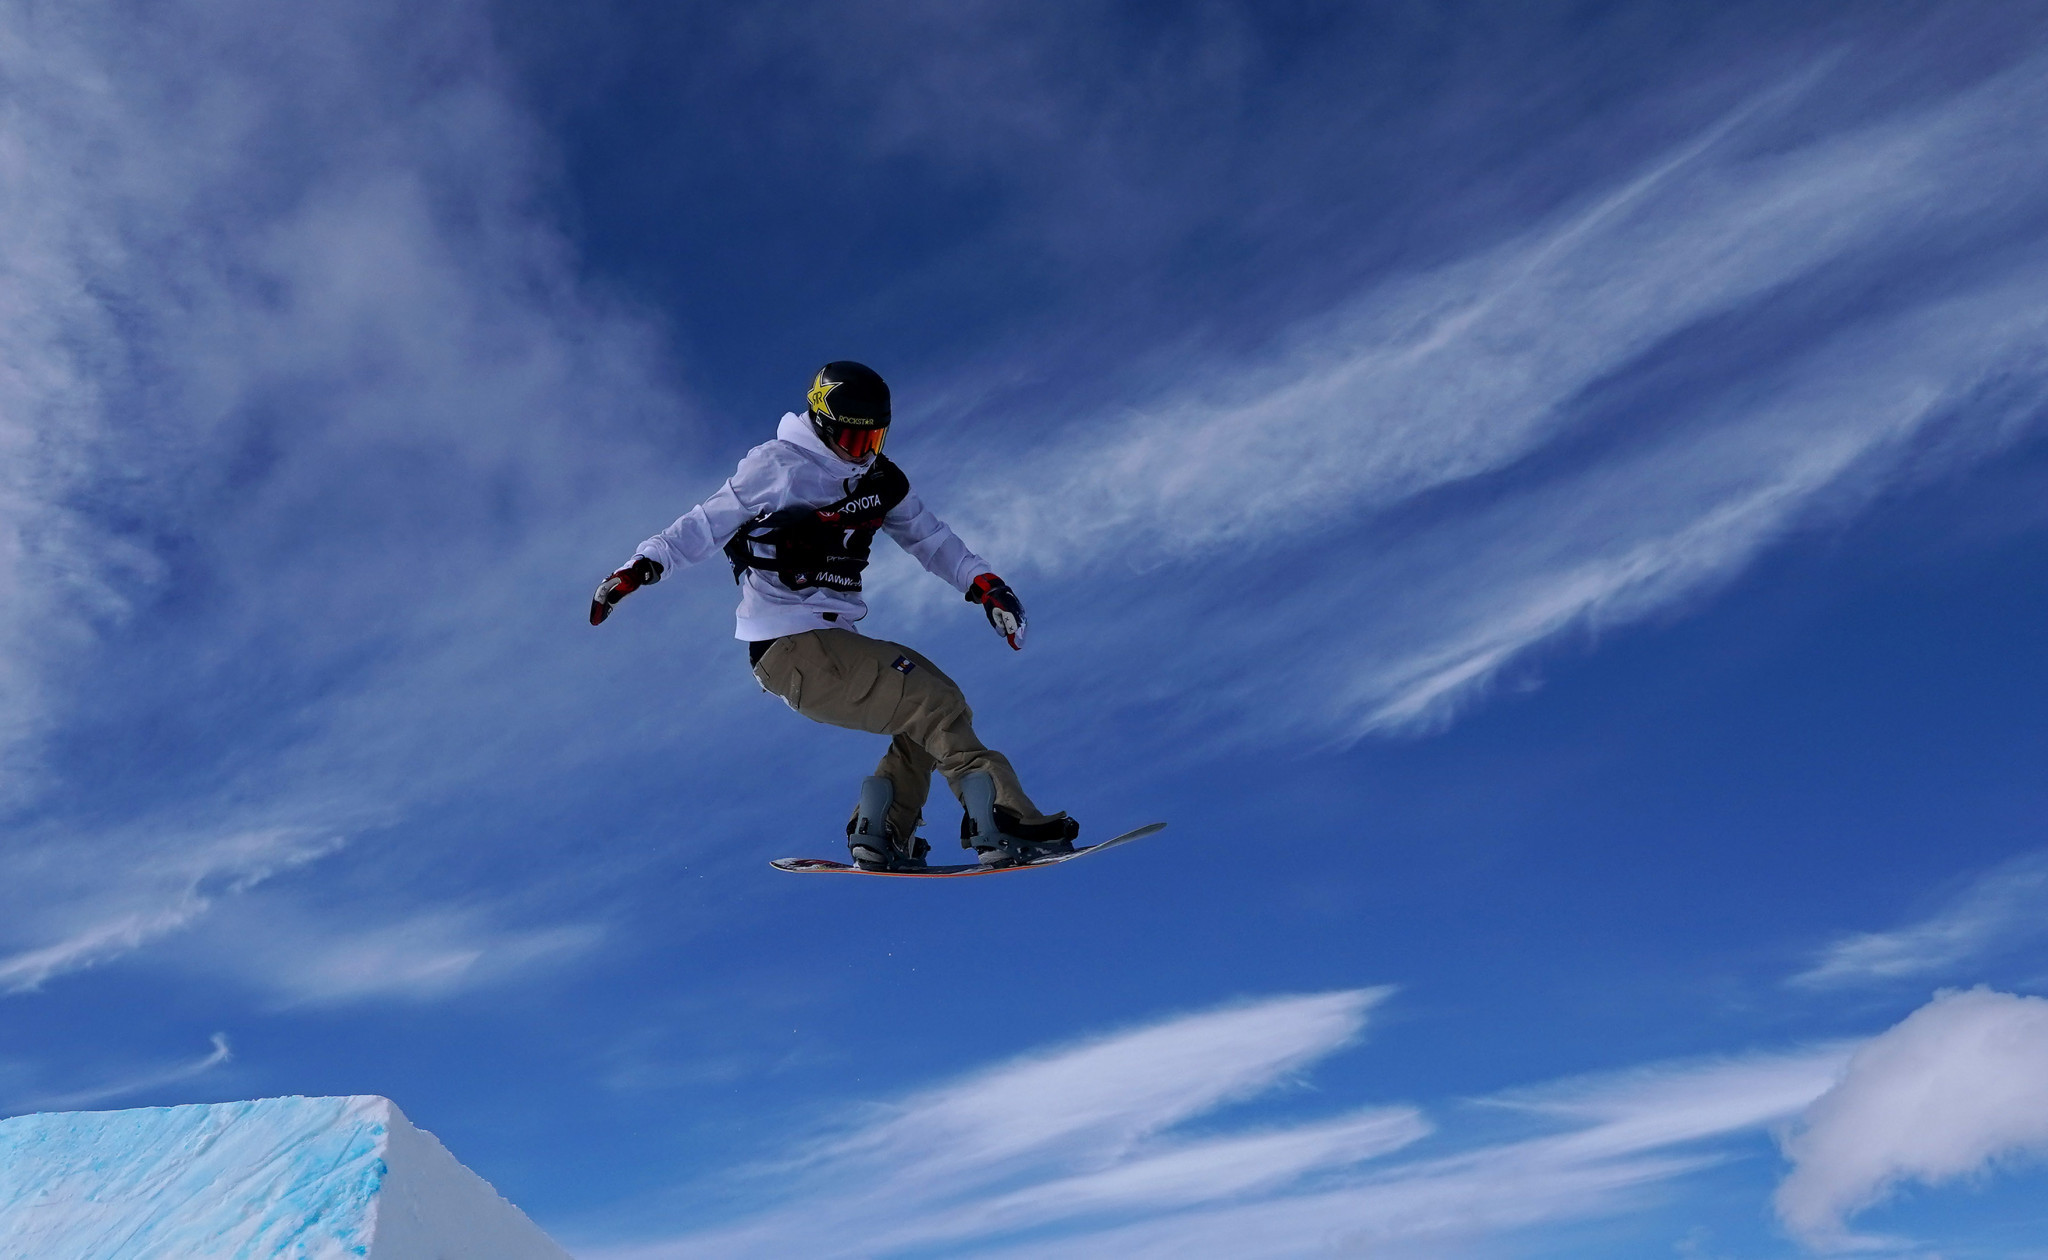 Snowboarder Chris Corning is among the nominees for the men's monthly USOPC award ©Getty Images